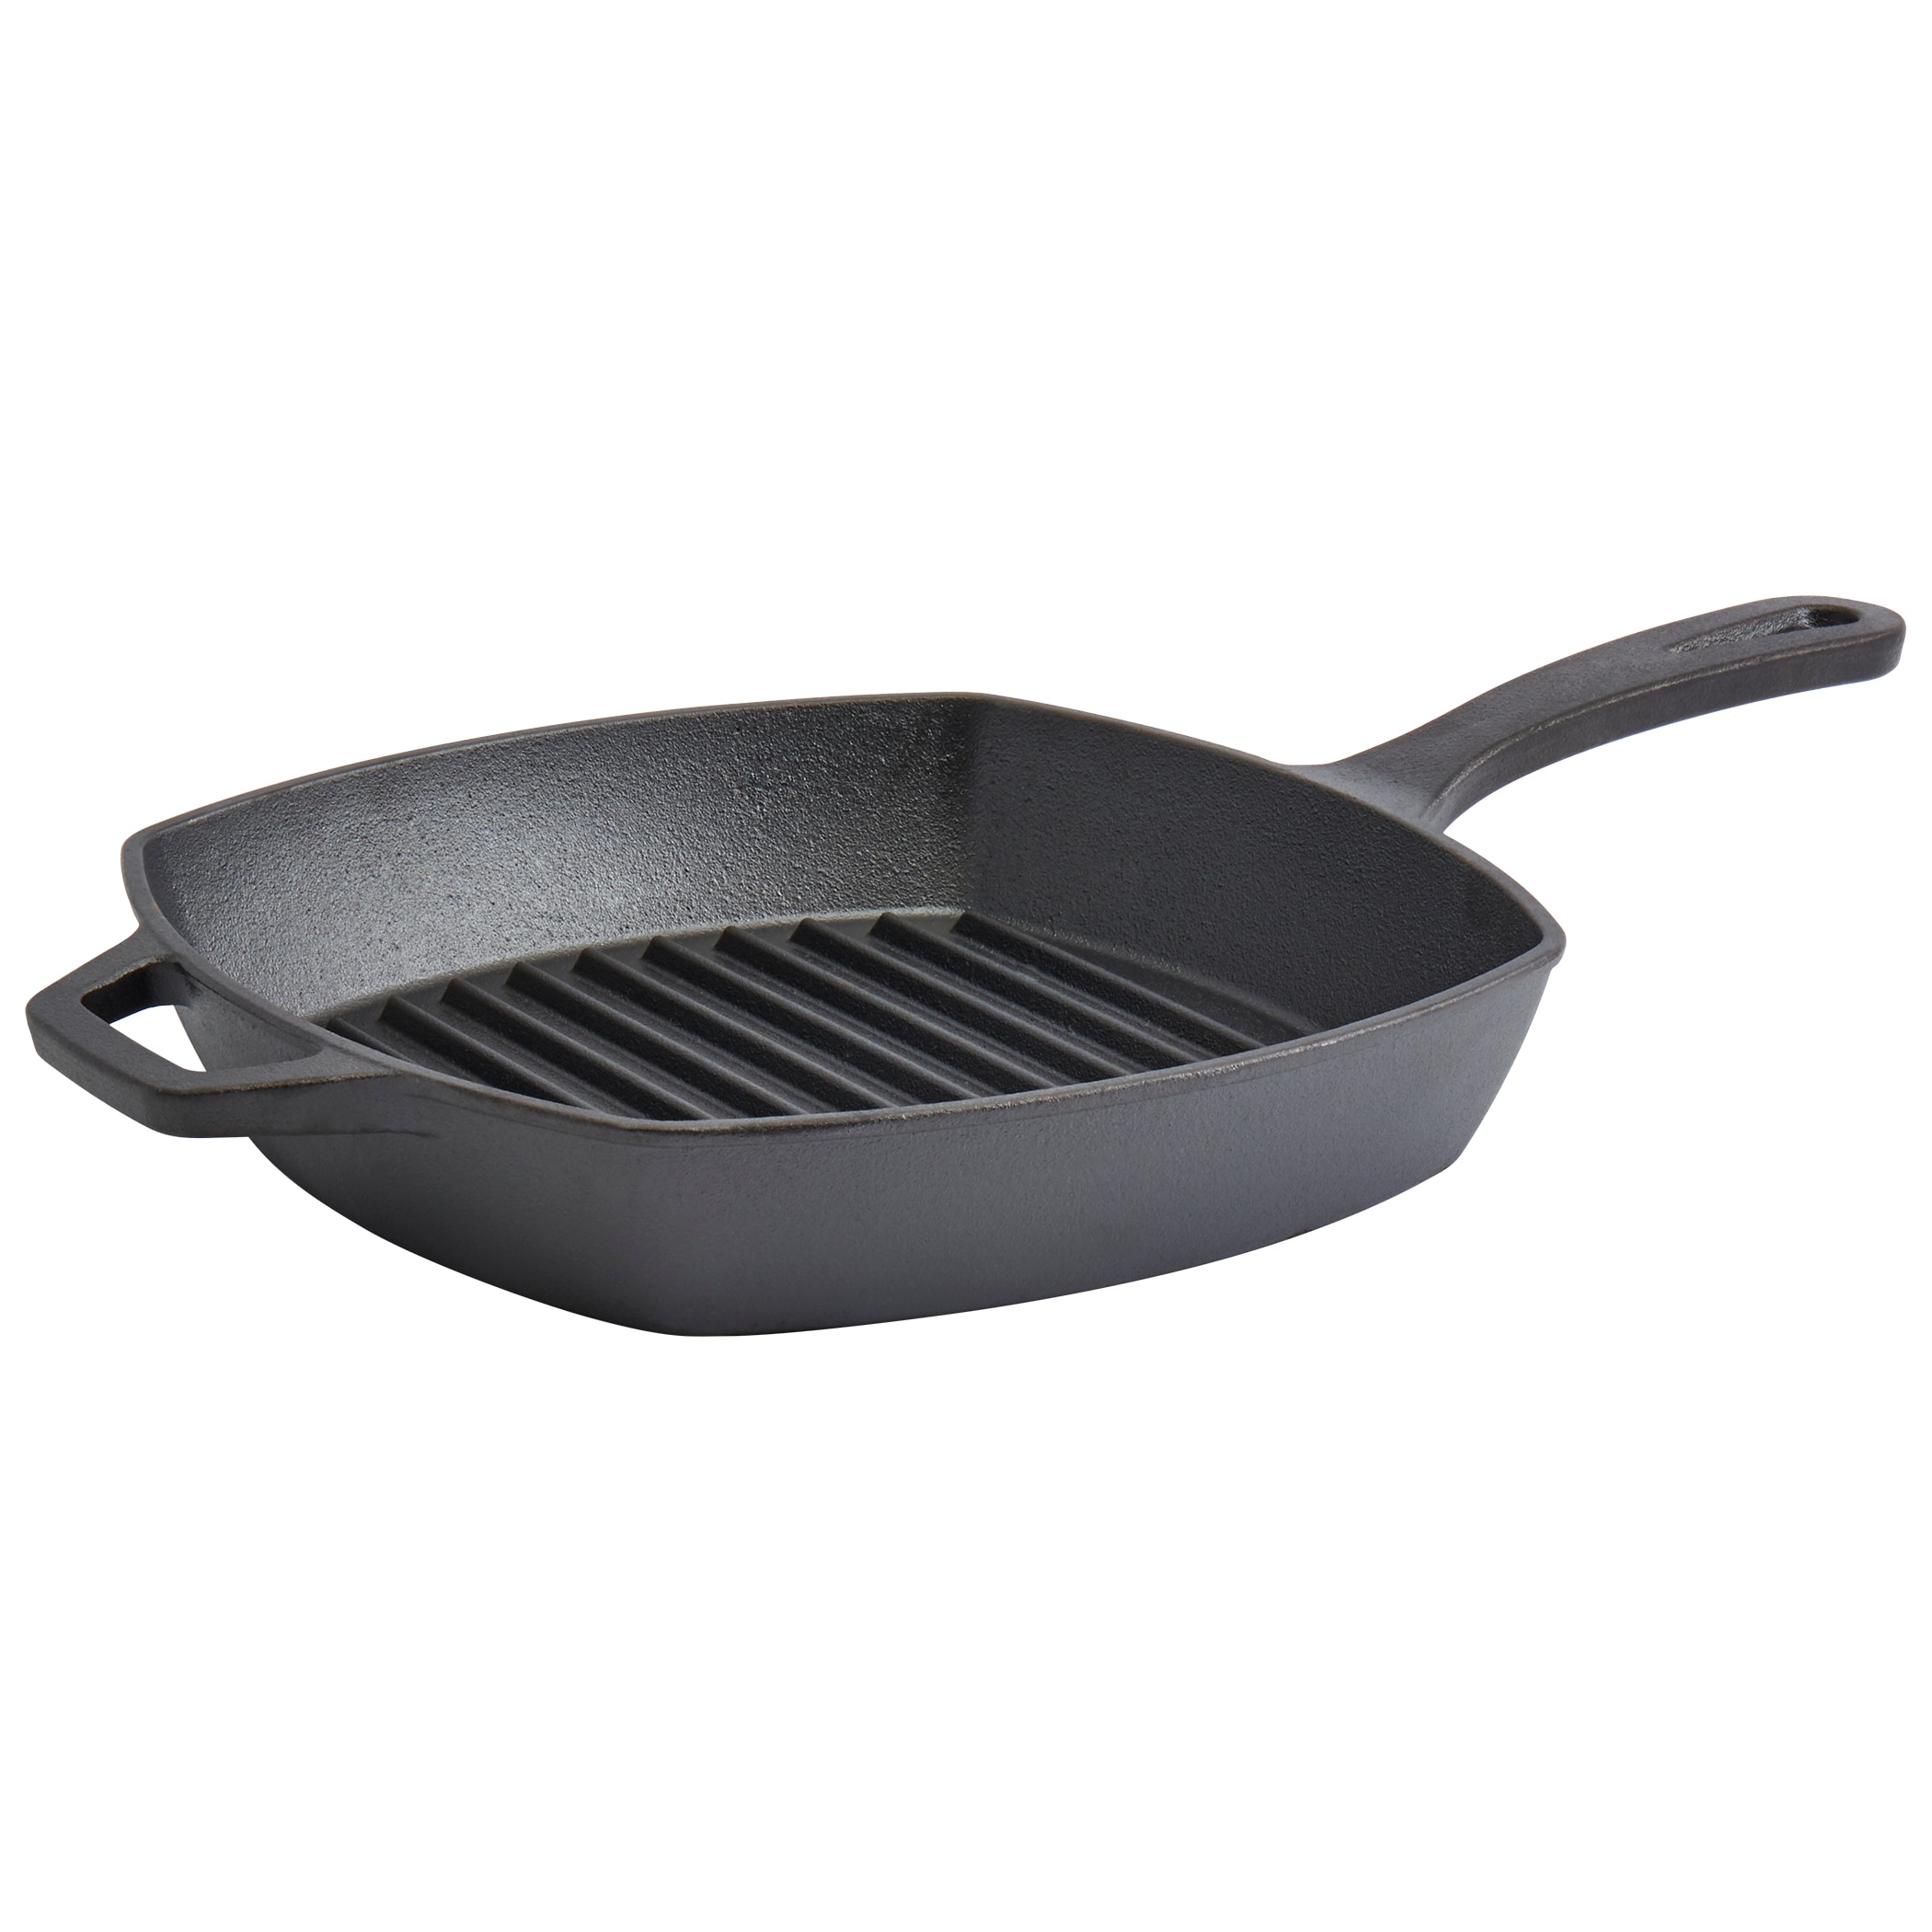 Smith Clark Ironworks Cast Iron Grill Pan, Pre-Seasoned, Oven Safe